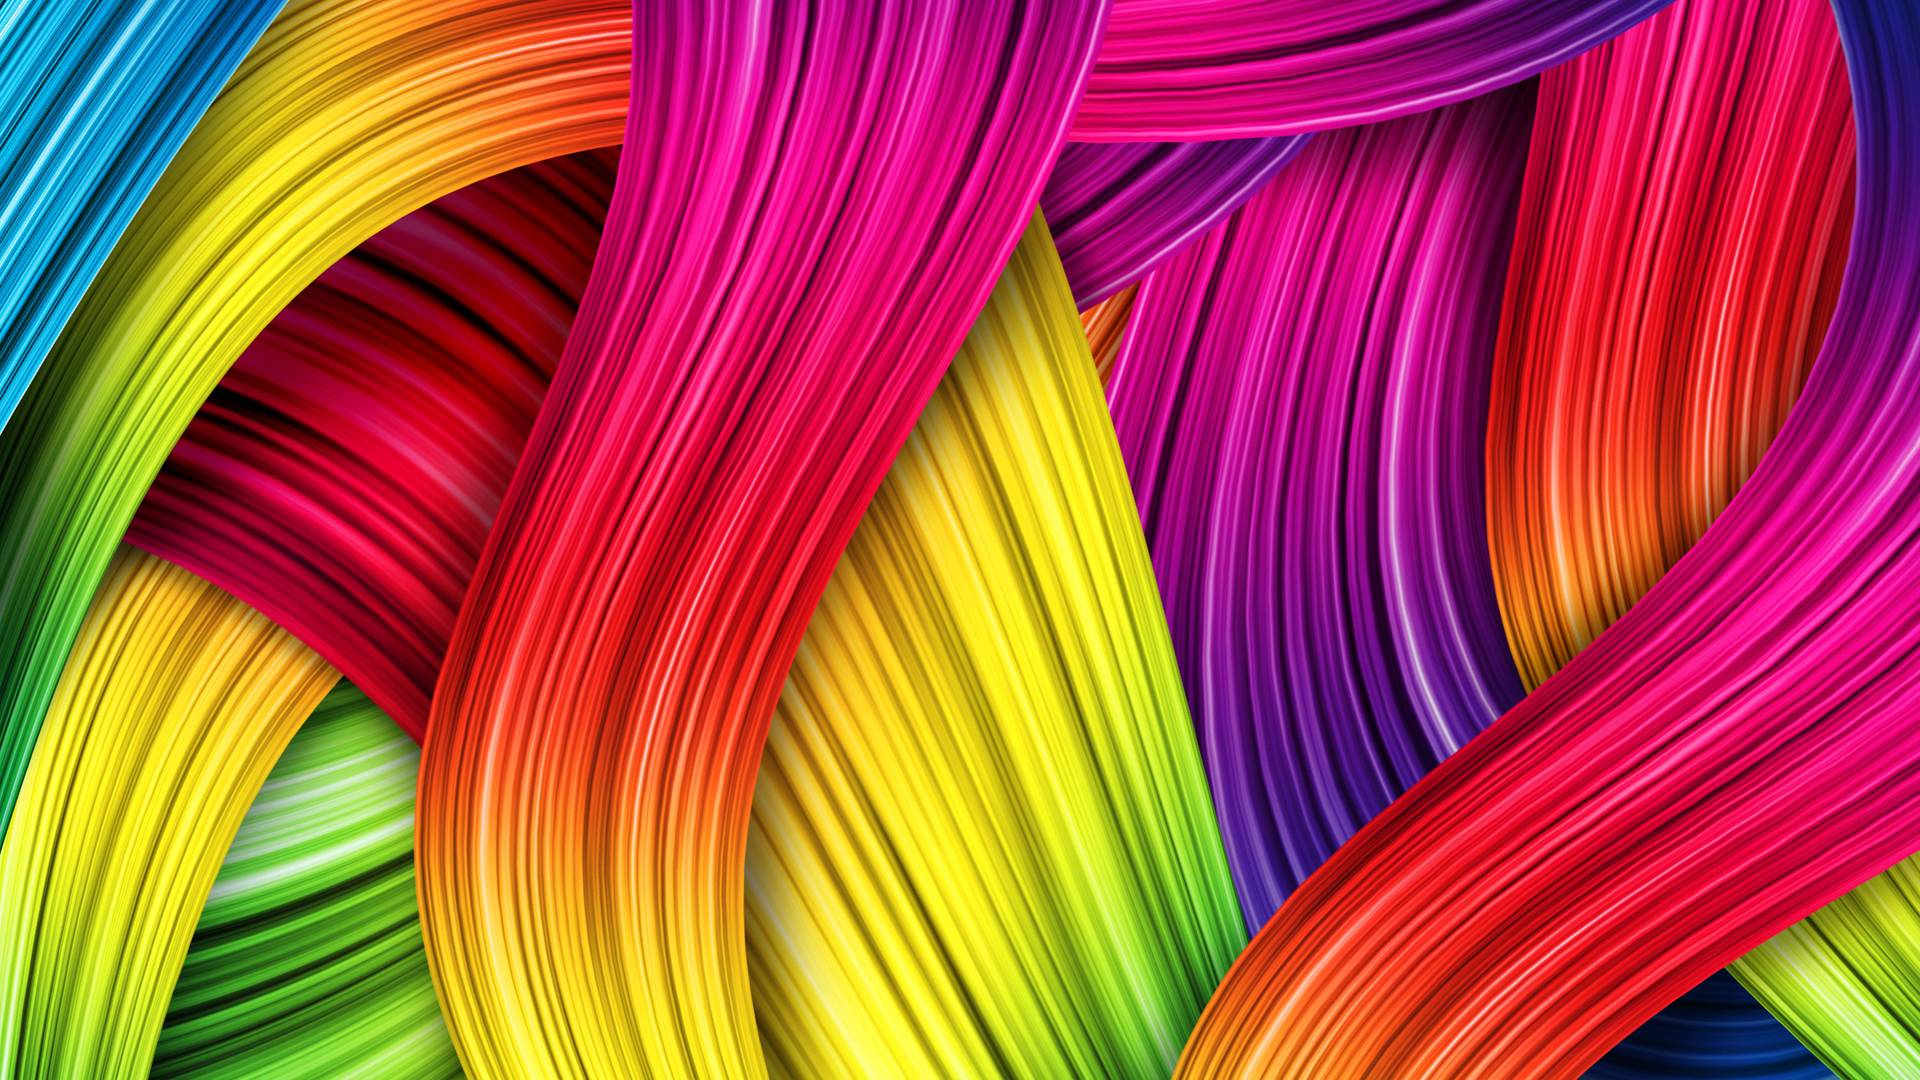 Colorful full hd hdtv fhd 1080p wallpapers hd desktop backgrounds  1920x1080 images and pictures